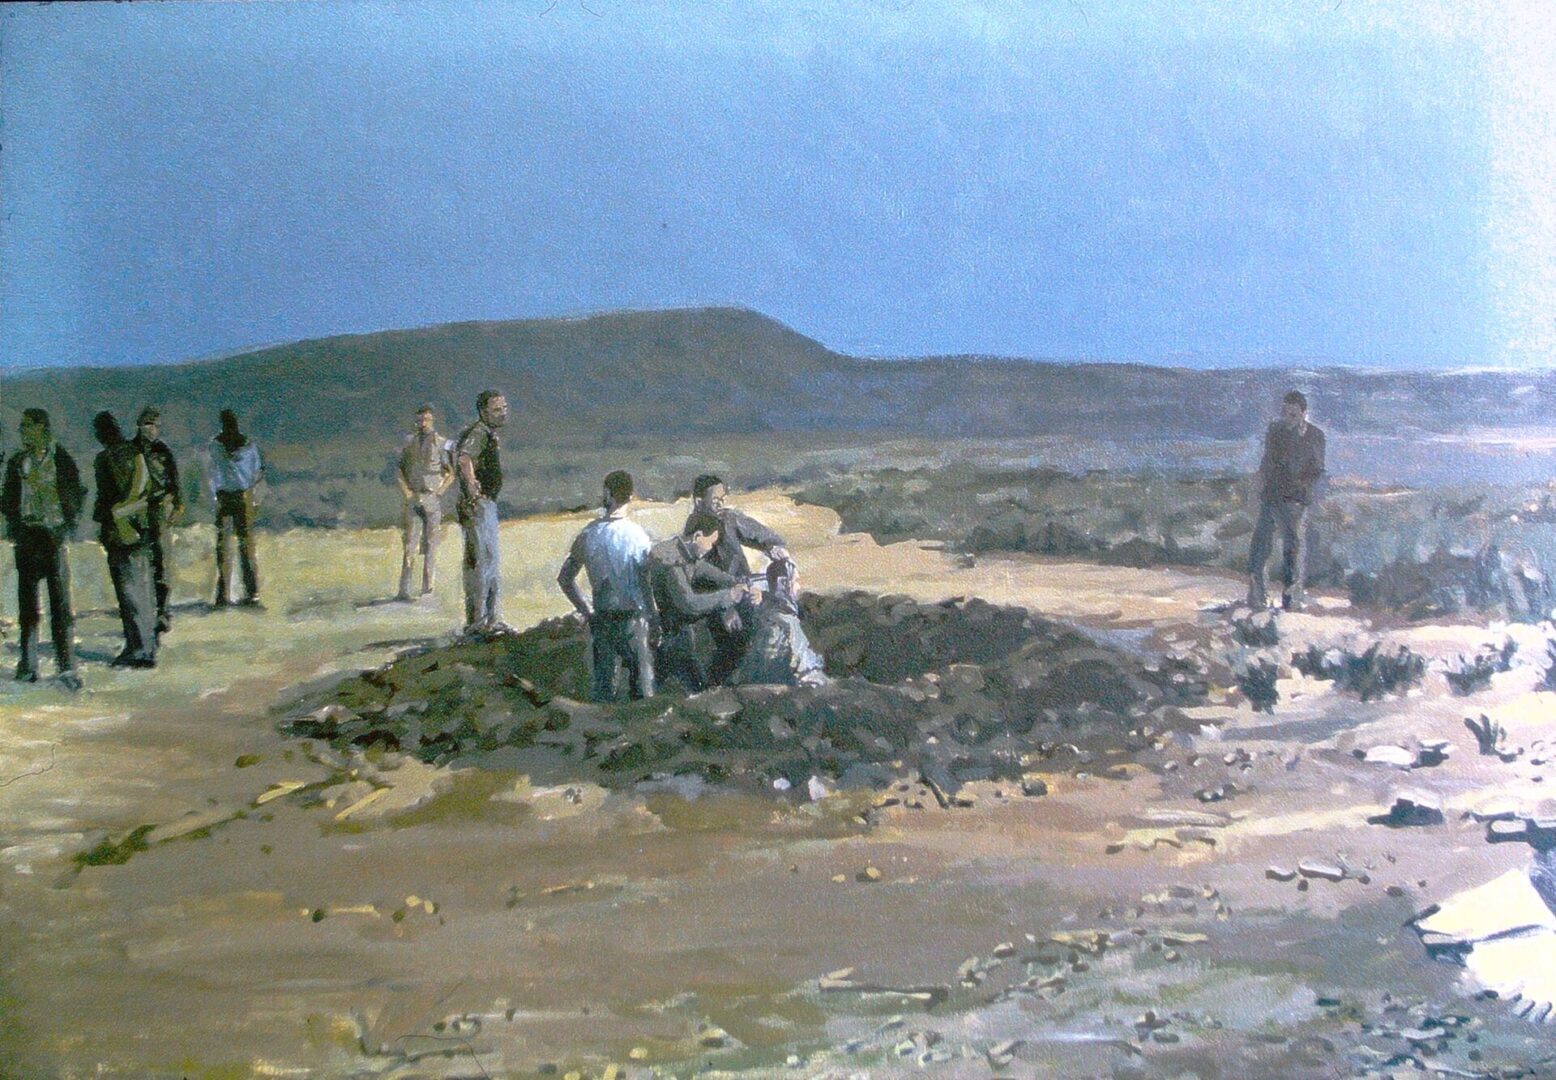 EXECUTION GROUND<br>
1985<br>
36" x 48"
